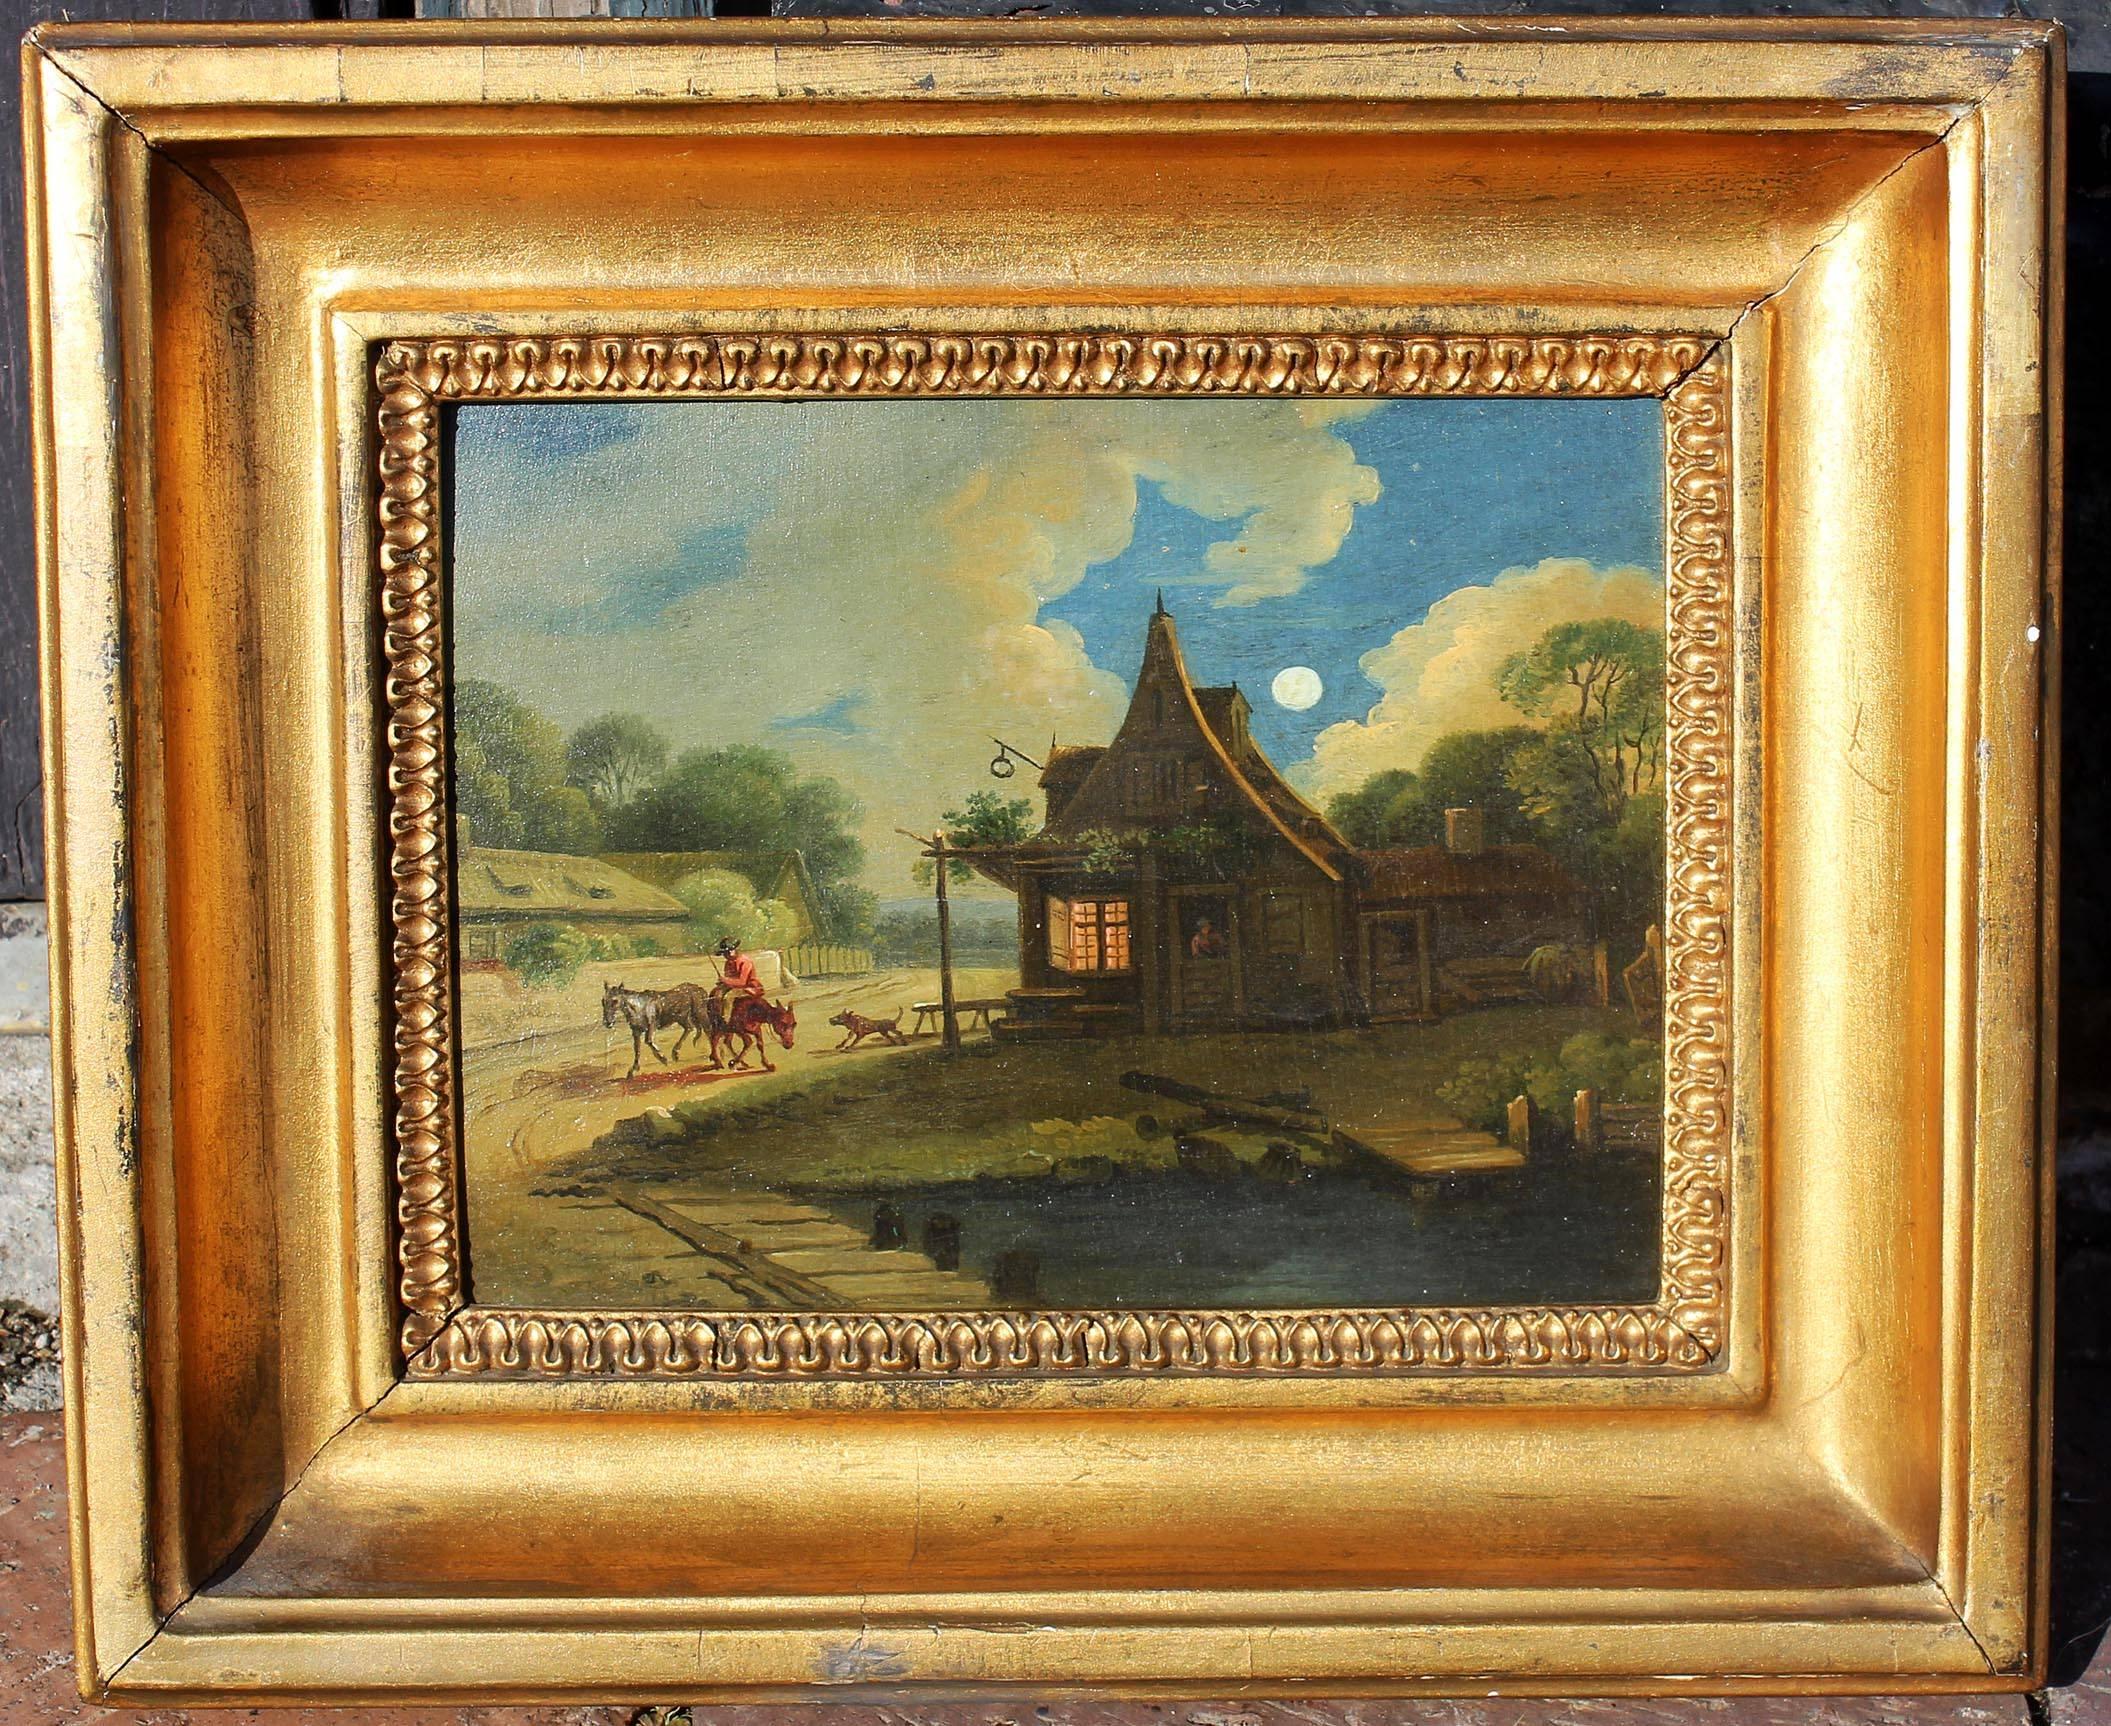 Old master style landscape oil painting. Continental moonlit scene. Oil on wood panel. Late 18th to early 19th century. Original gilt frame.